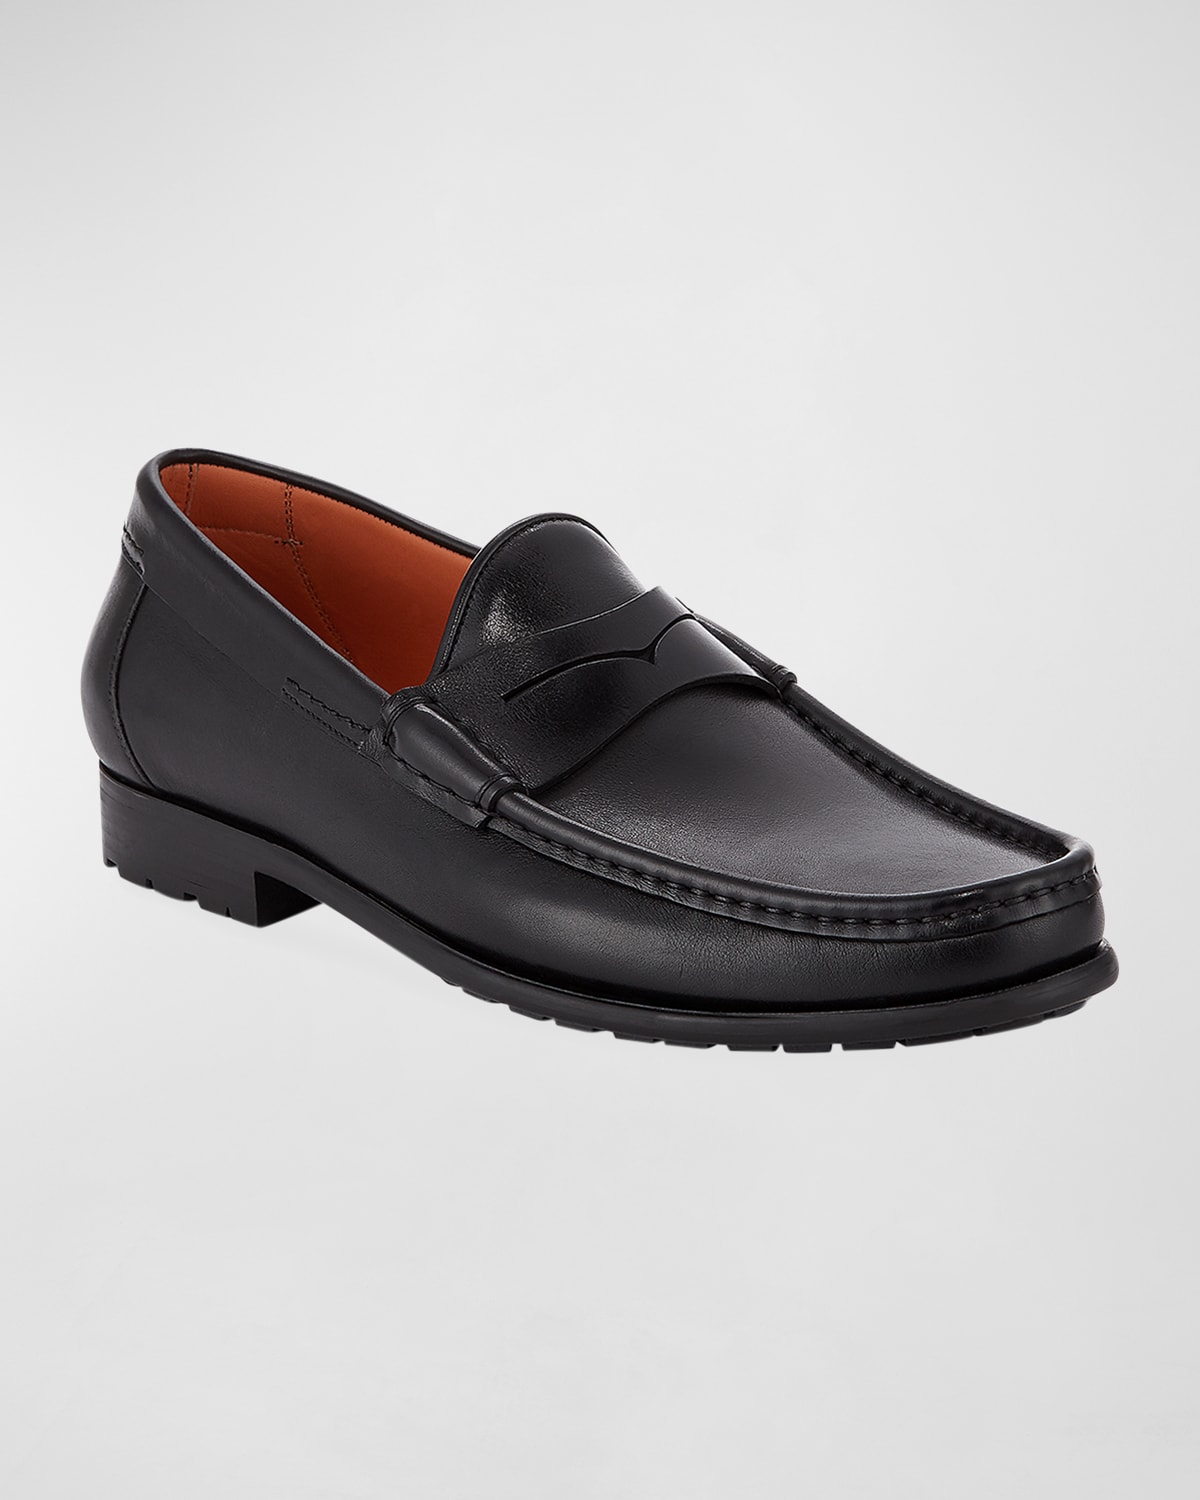 Men's Ettore Leather Casual Penny Loafers